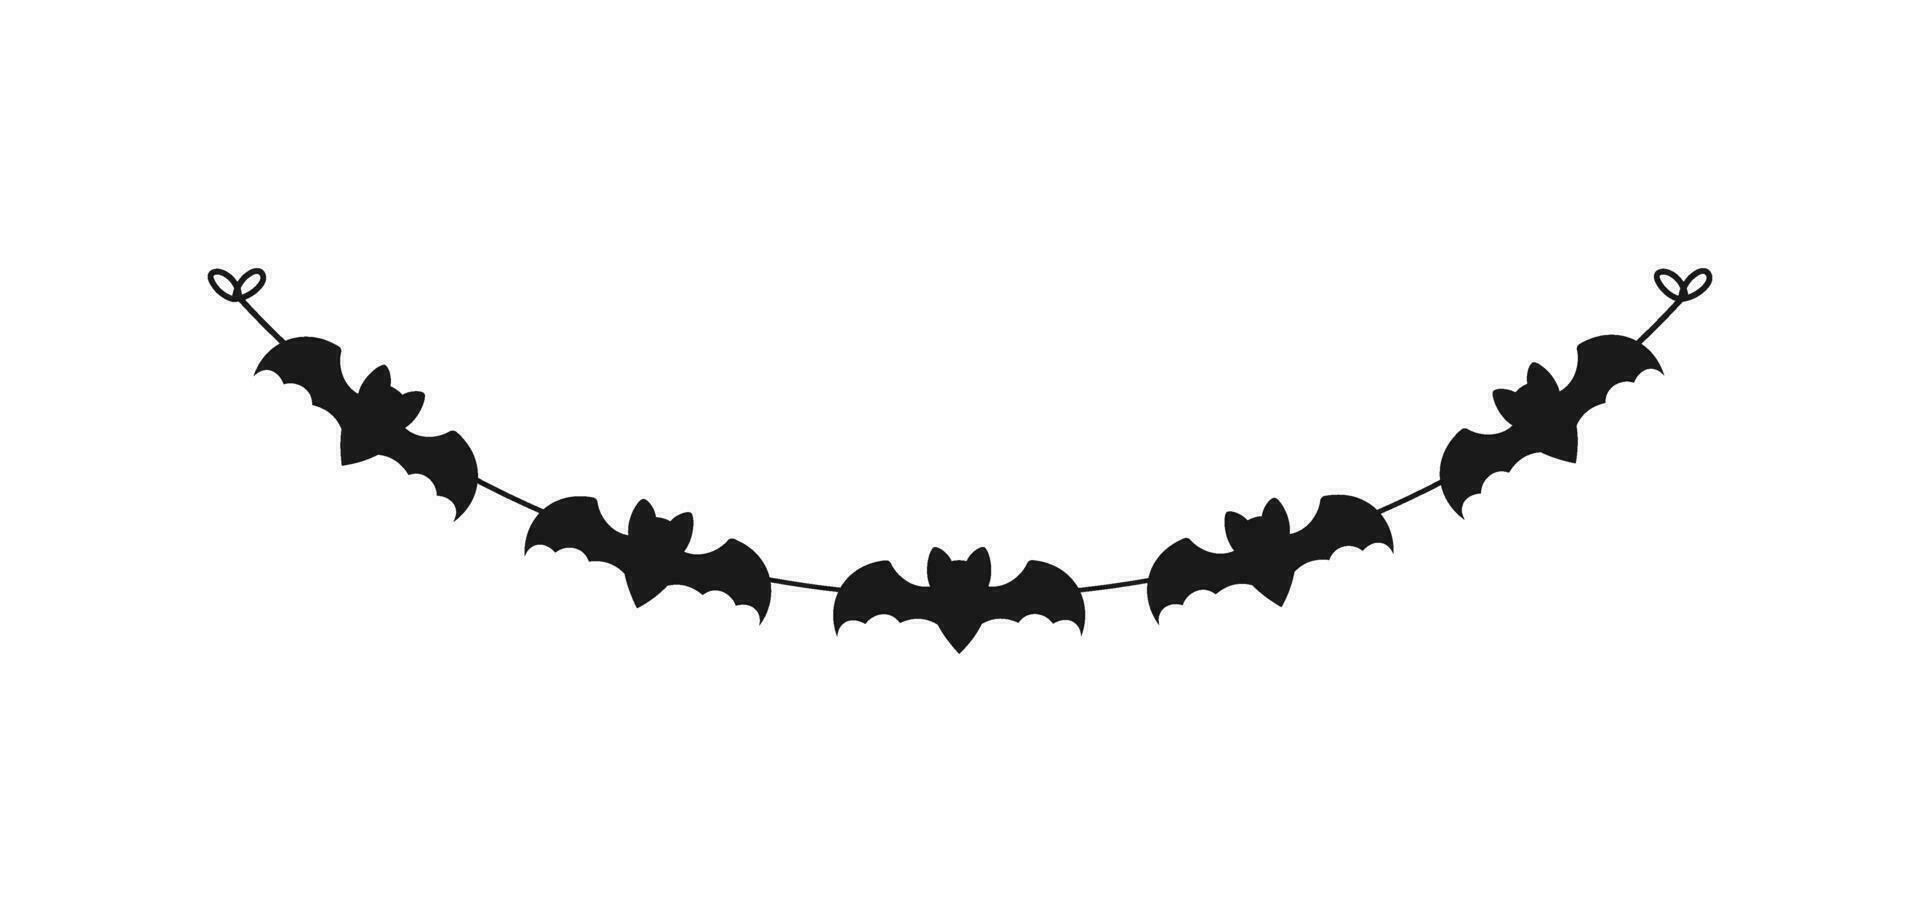 Cute Halloween Bats Garland Silhouette. Simple hanging party banner classy decor vector element.